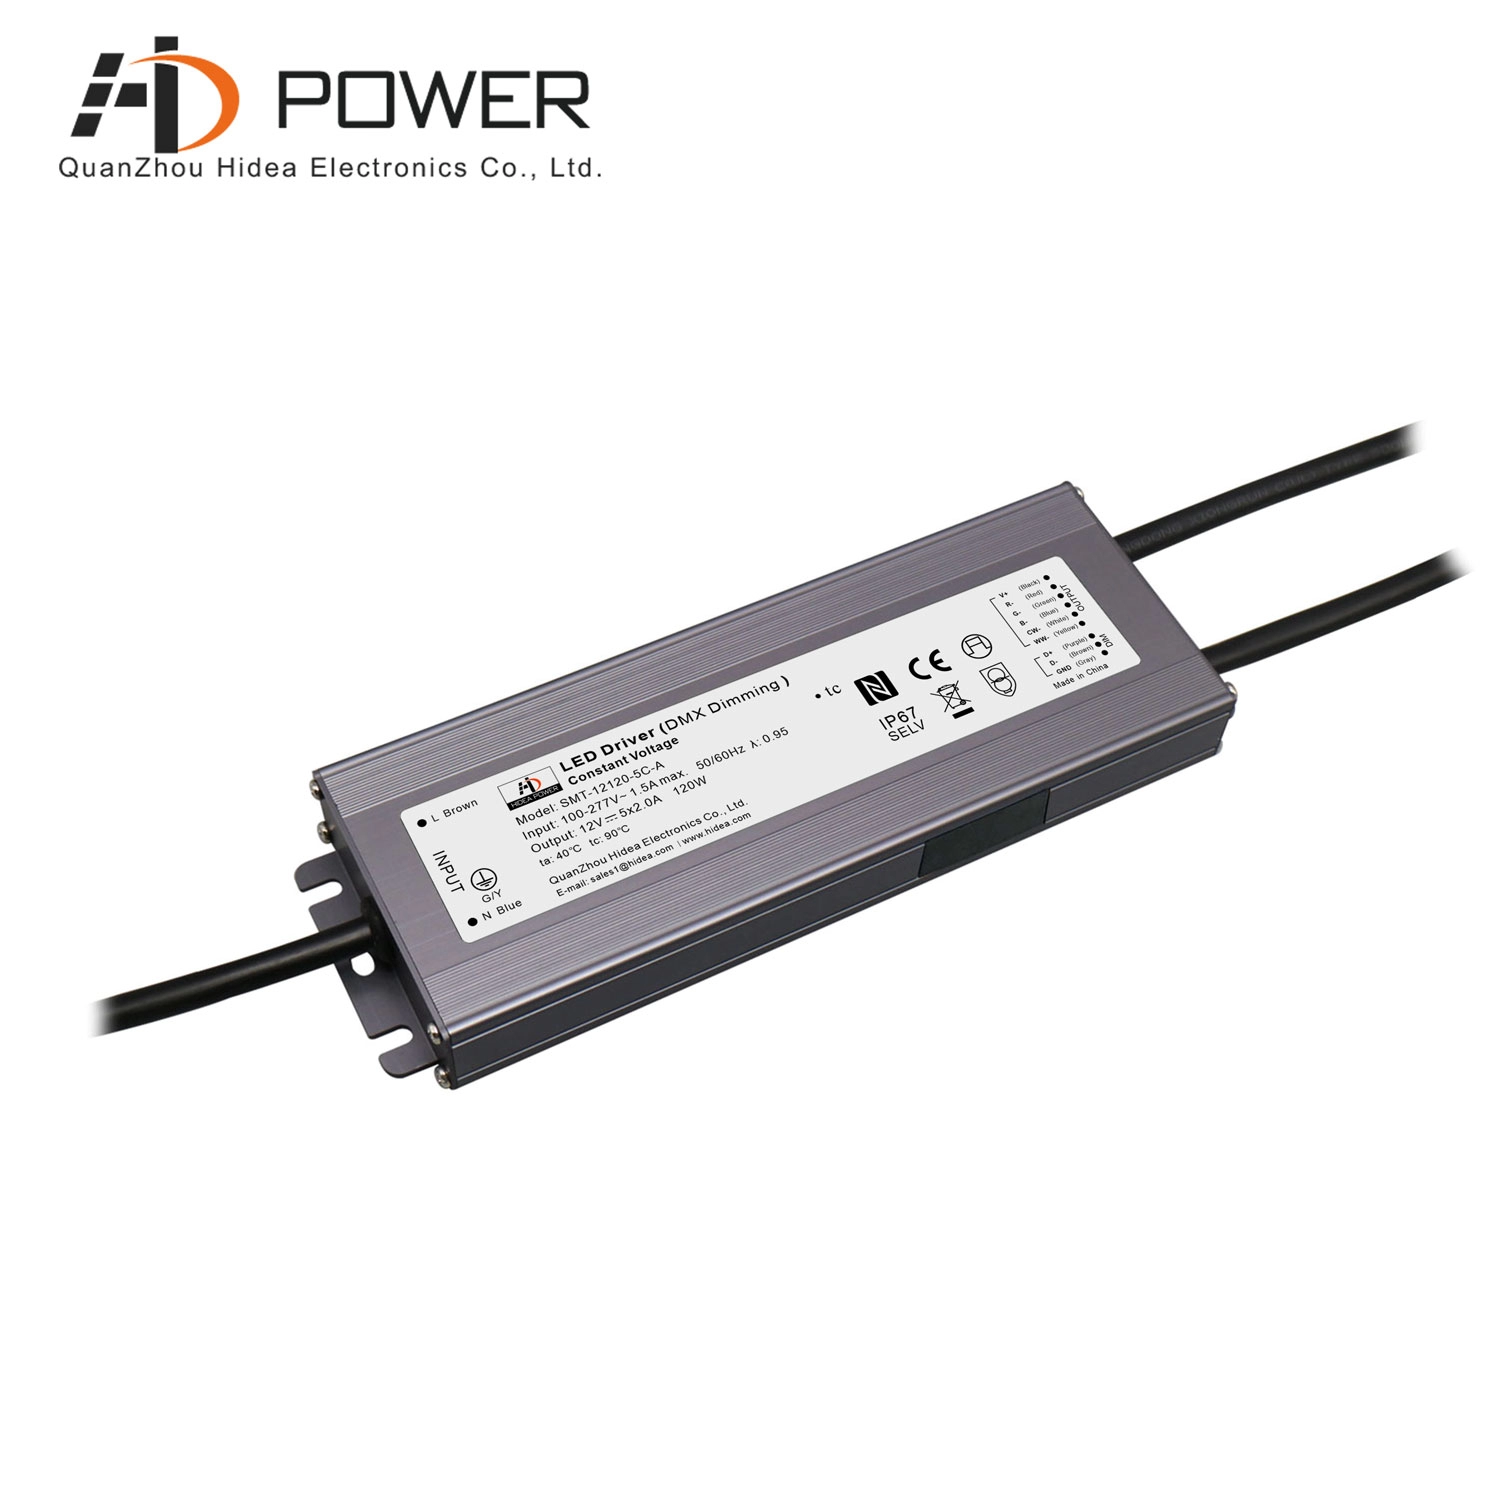 12v DMX dimmable led strip power supply driver ip67